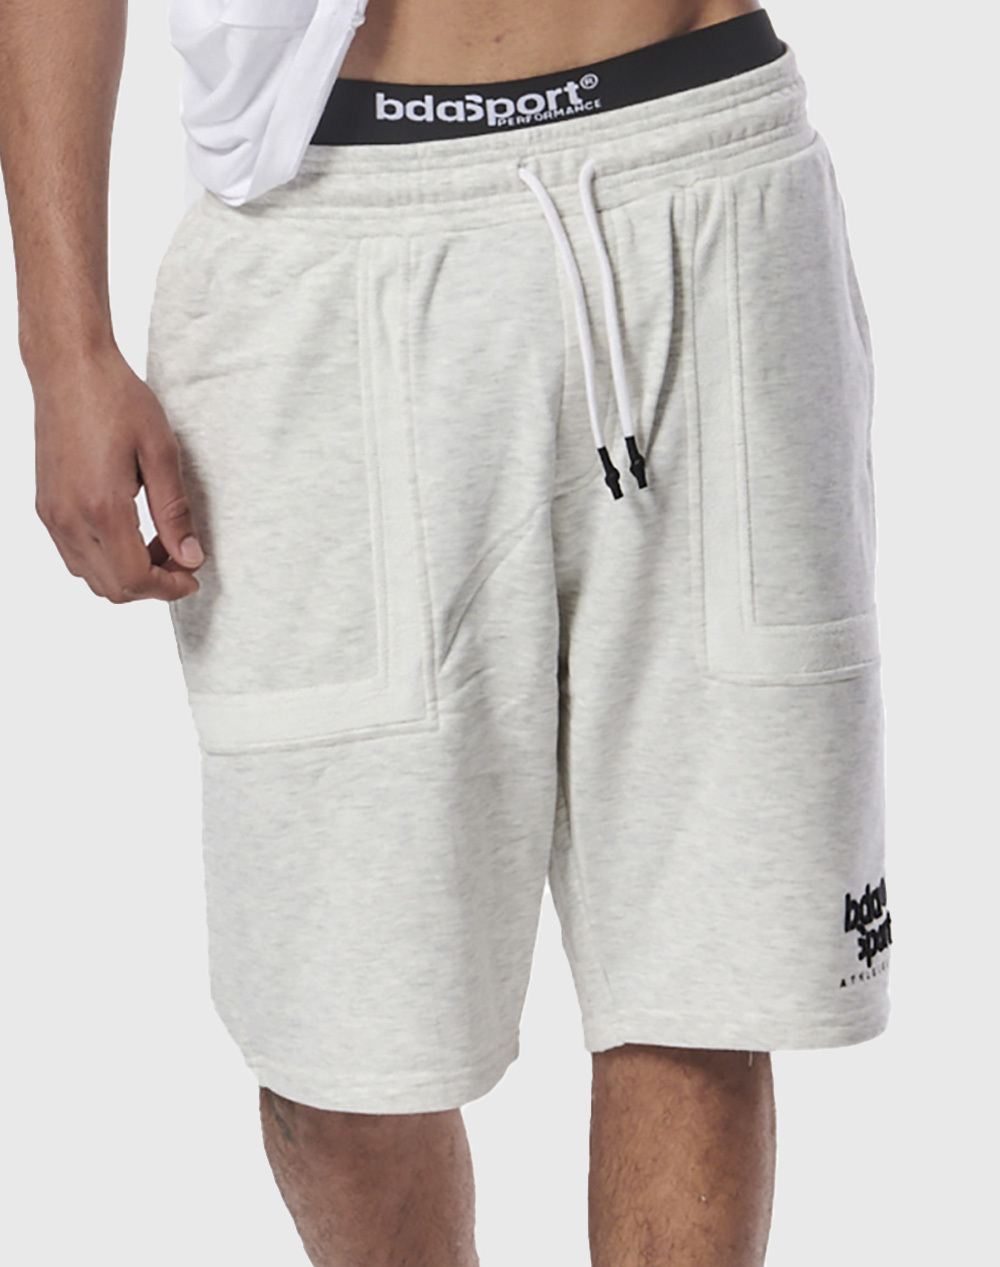 BODY ACTION MEN''S ATHLETIC SHORTS W/EMBROIDERY